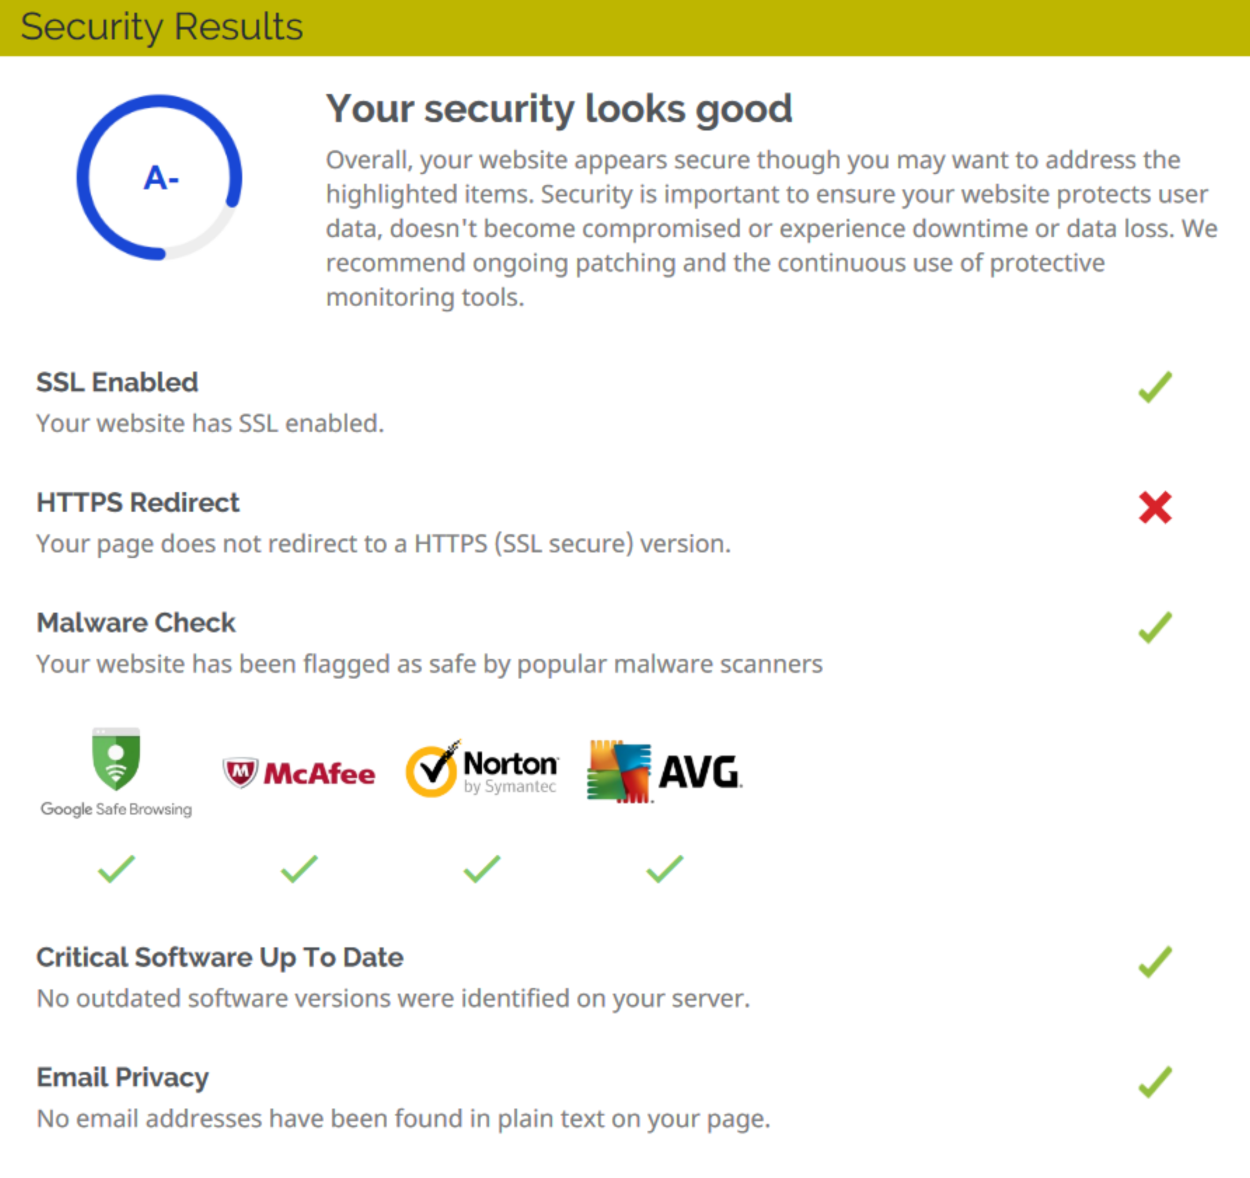 Website Audit Tool - Security Results